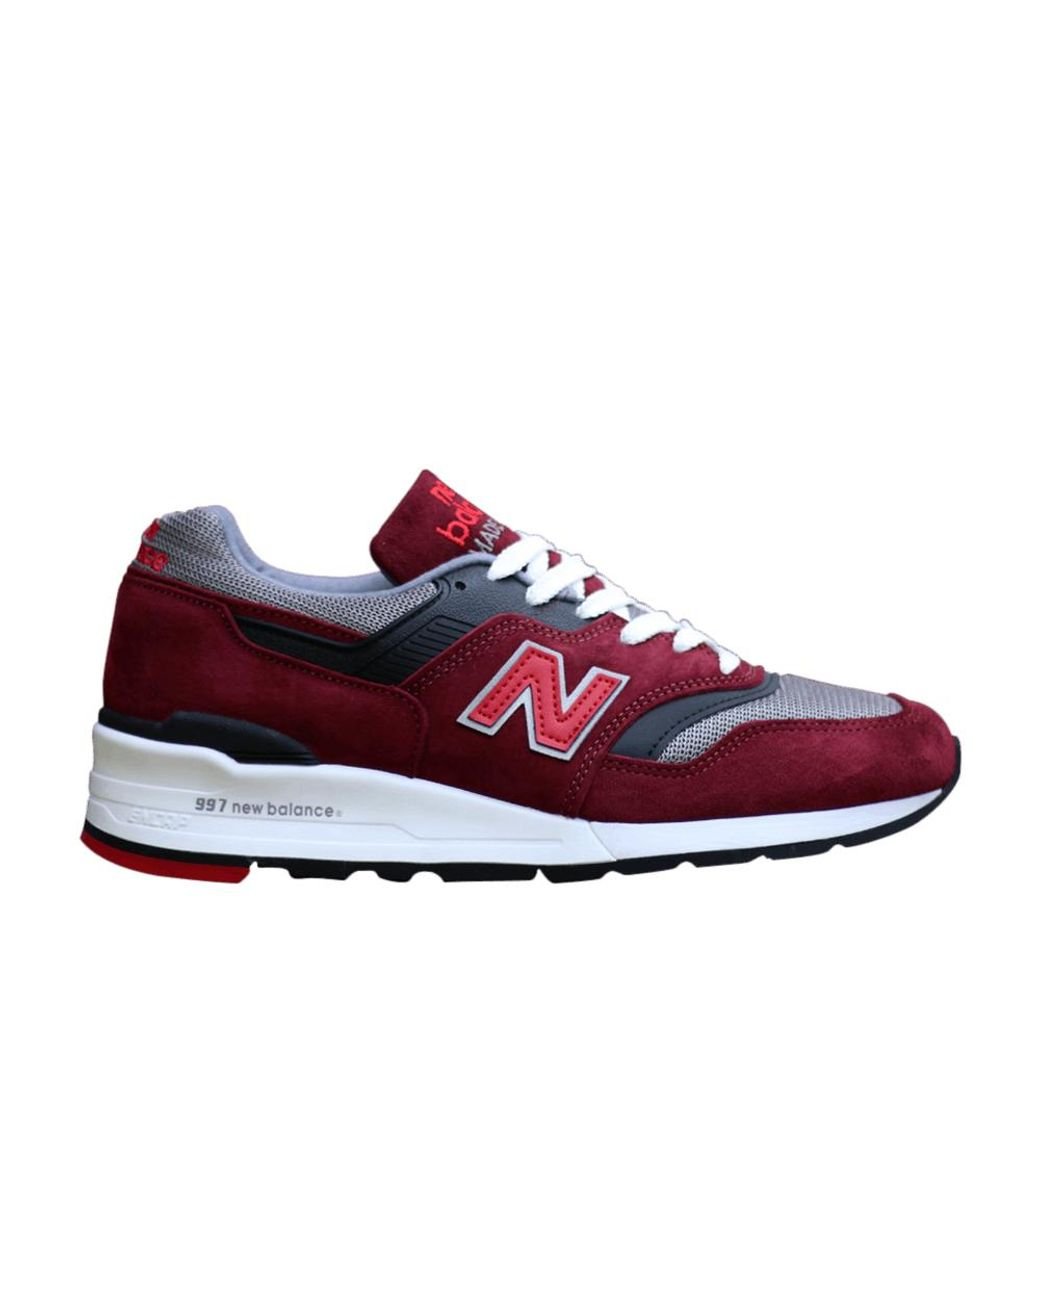 New Balance 997 Made In Usa Burgundy in Red for Men - Save 84% - Lyst